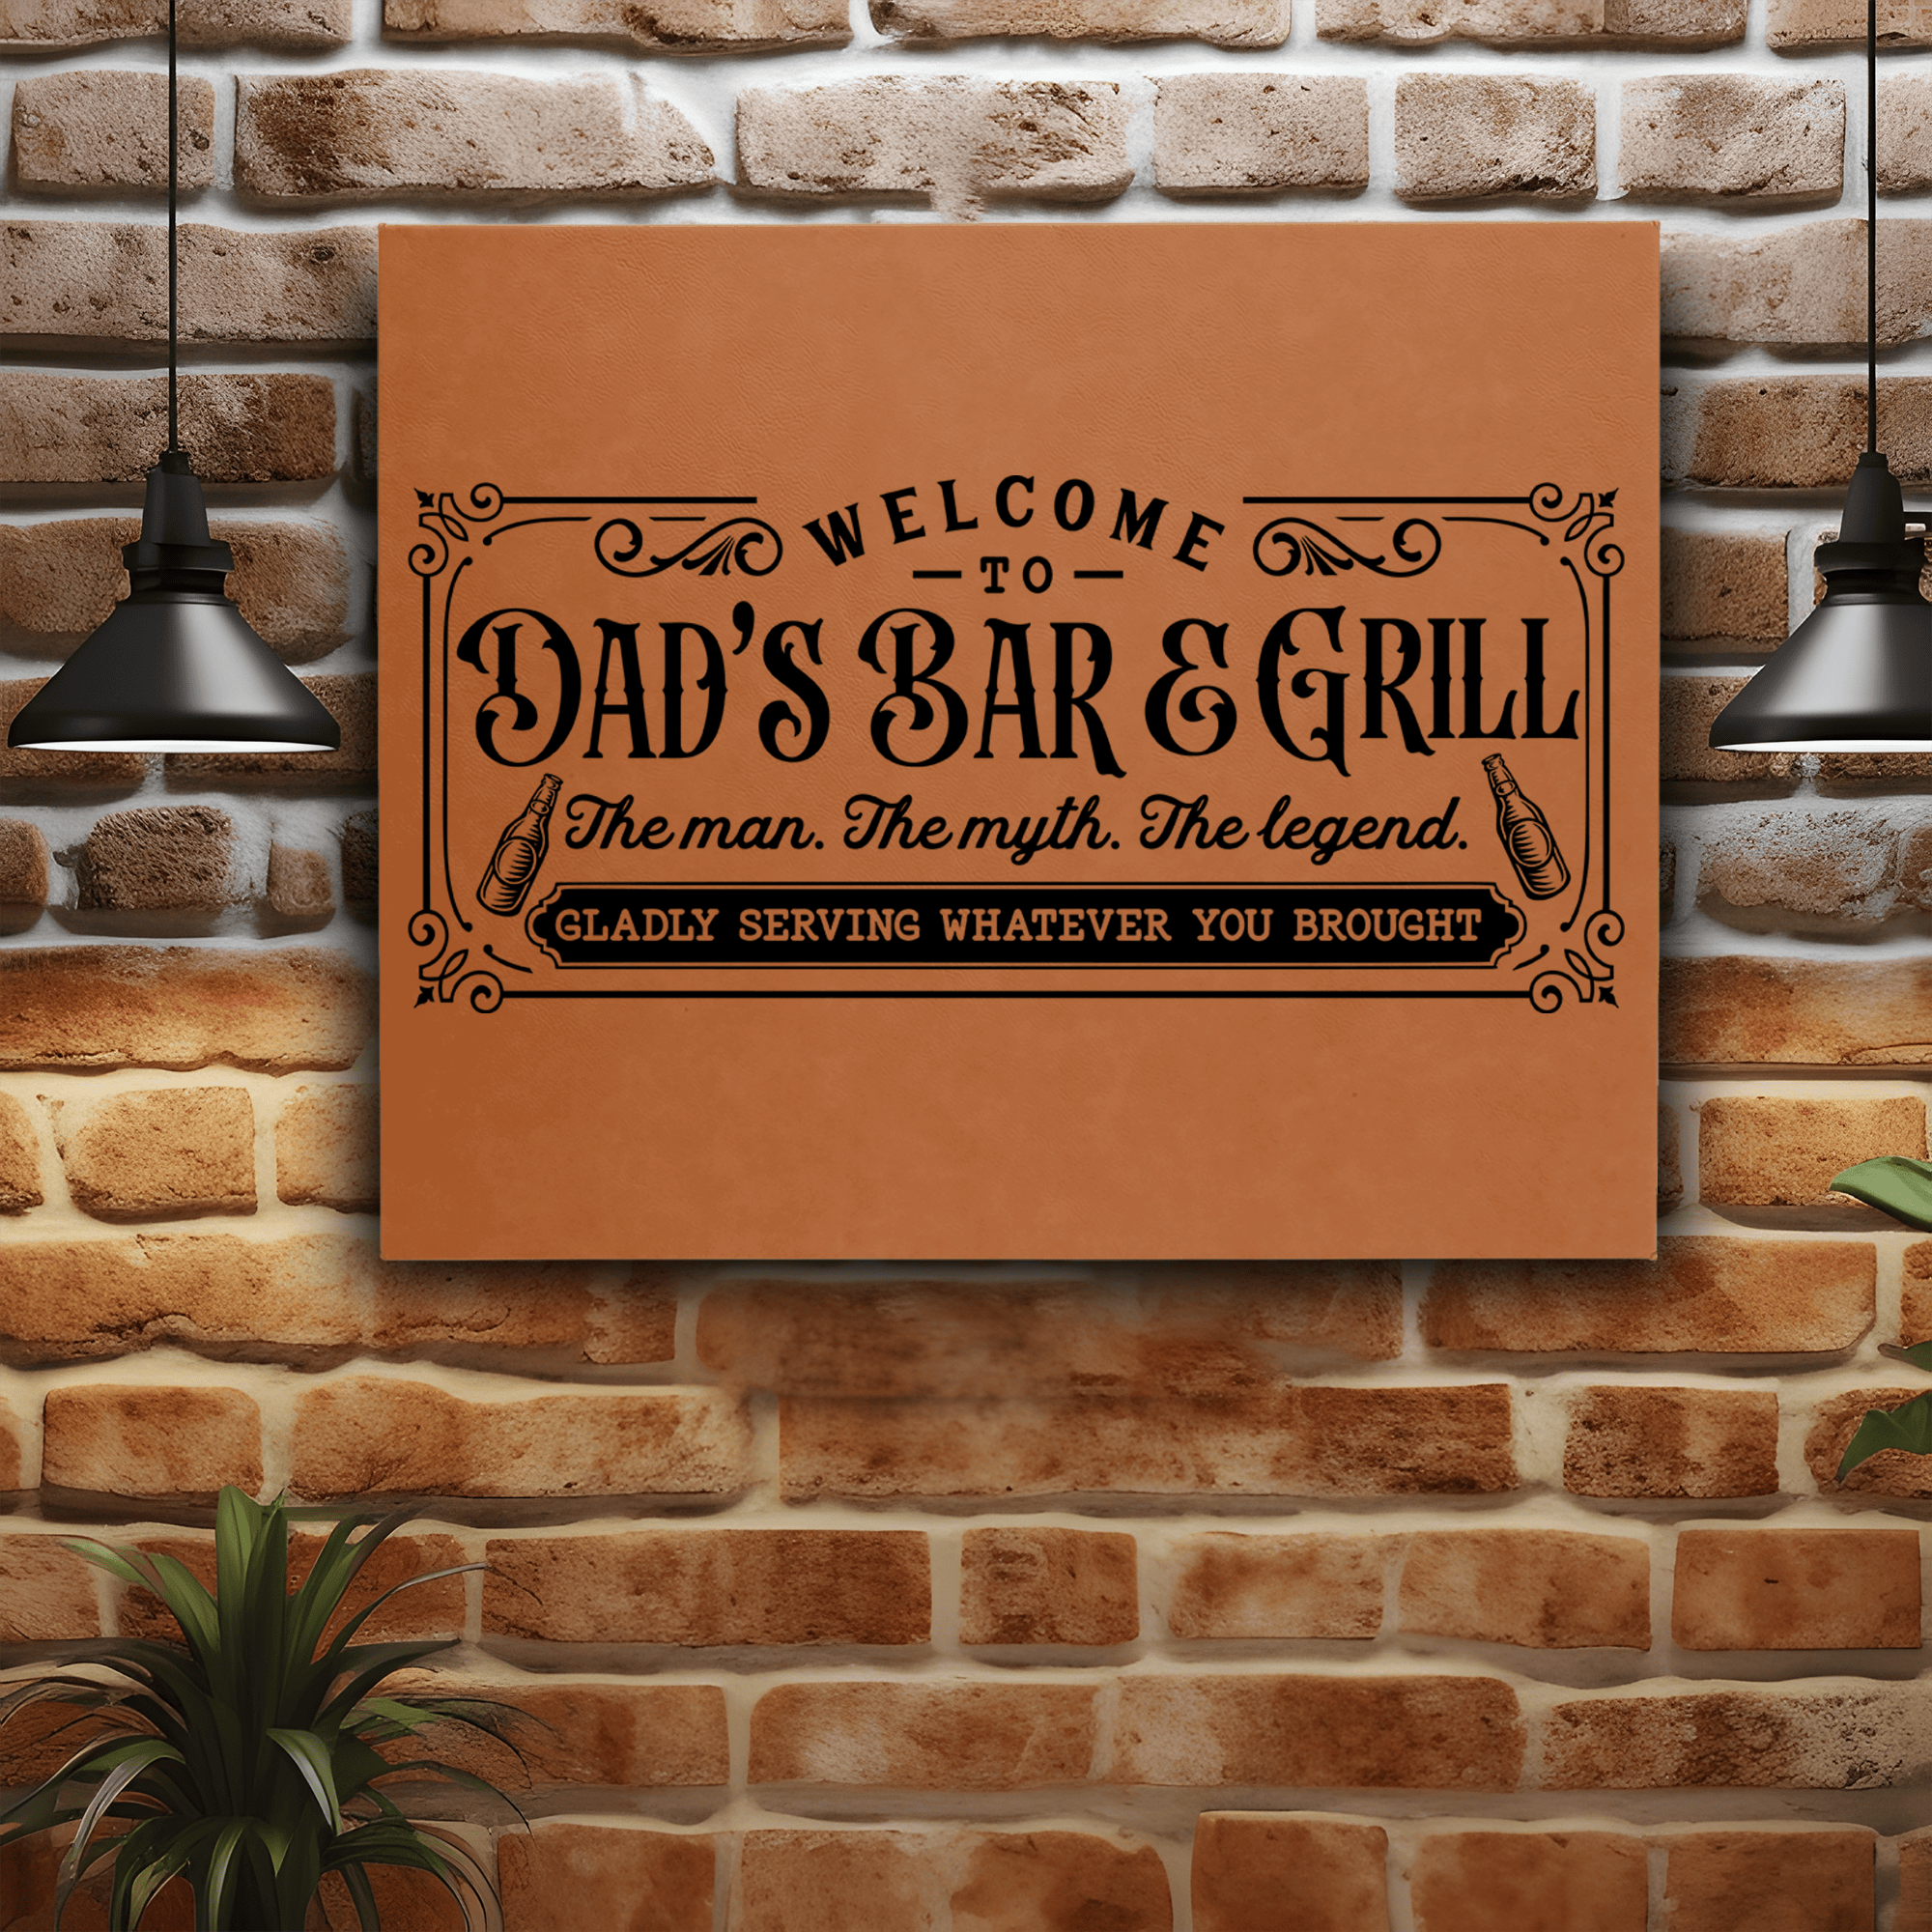 Rawhide Leather Wall Decor With Legendary Dads Bar And Grill Design